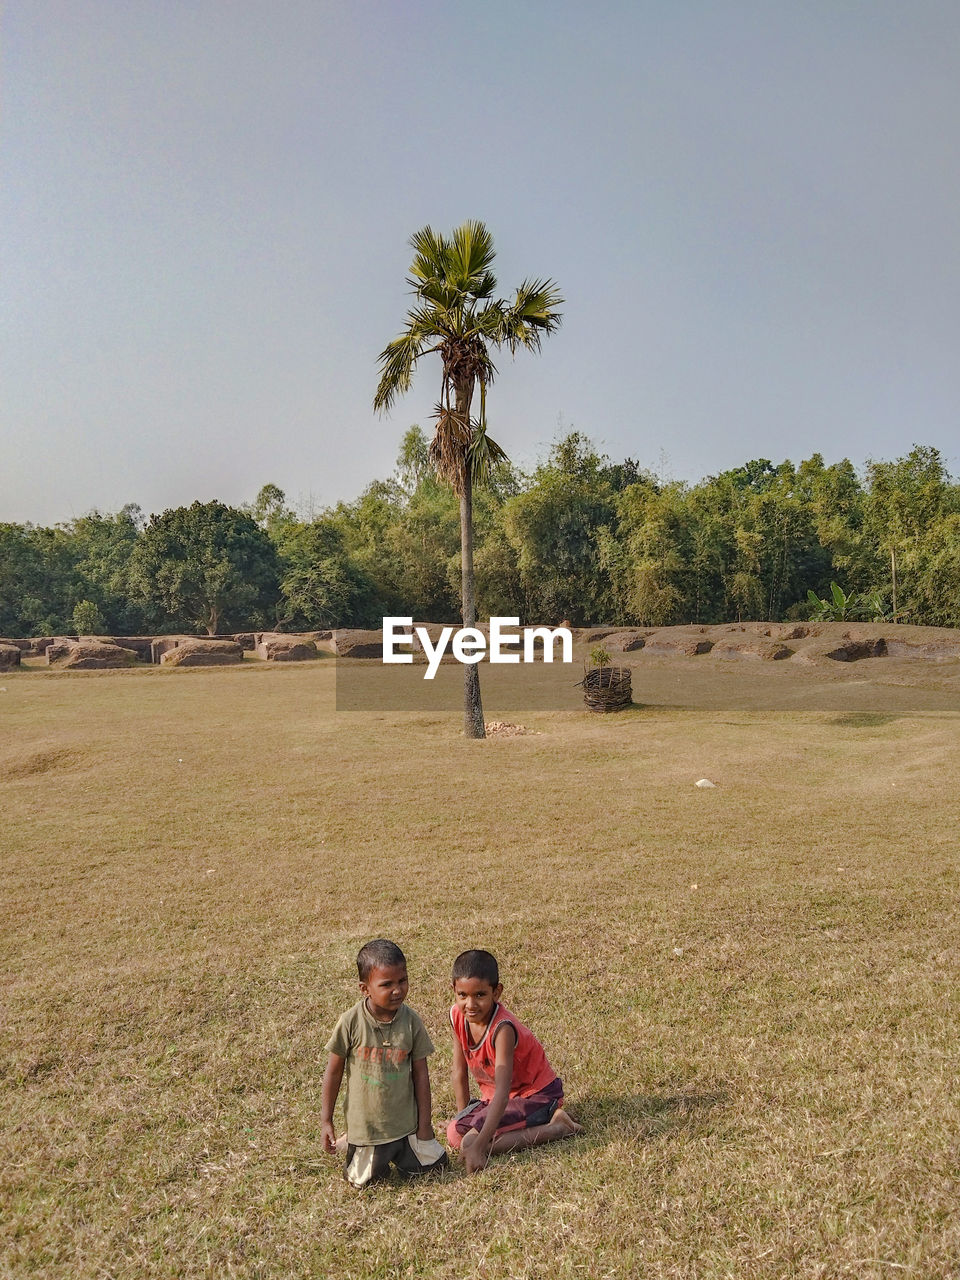 plant, tree, nature, palm tree, land, men, tropical climate, two people, adult, sky, togetherness, field, sitting, women, leisure activity, landscape, day, child, person, childhood, female, agriculture, environment, outdoors, full length, emotion, rural area, casual clothing, family, lifestyles, copy space, bonding, relaxation, beauty in nature, vacation, trip, sunny, holiday, grass, enjoyment, positive emotion, scenics - nature, sunlight